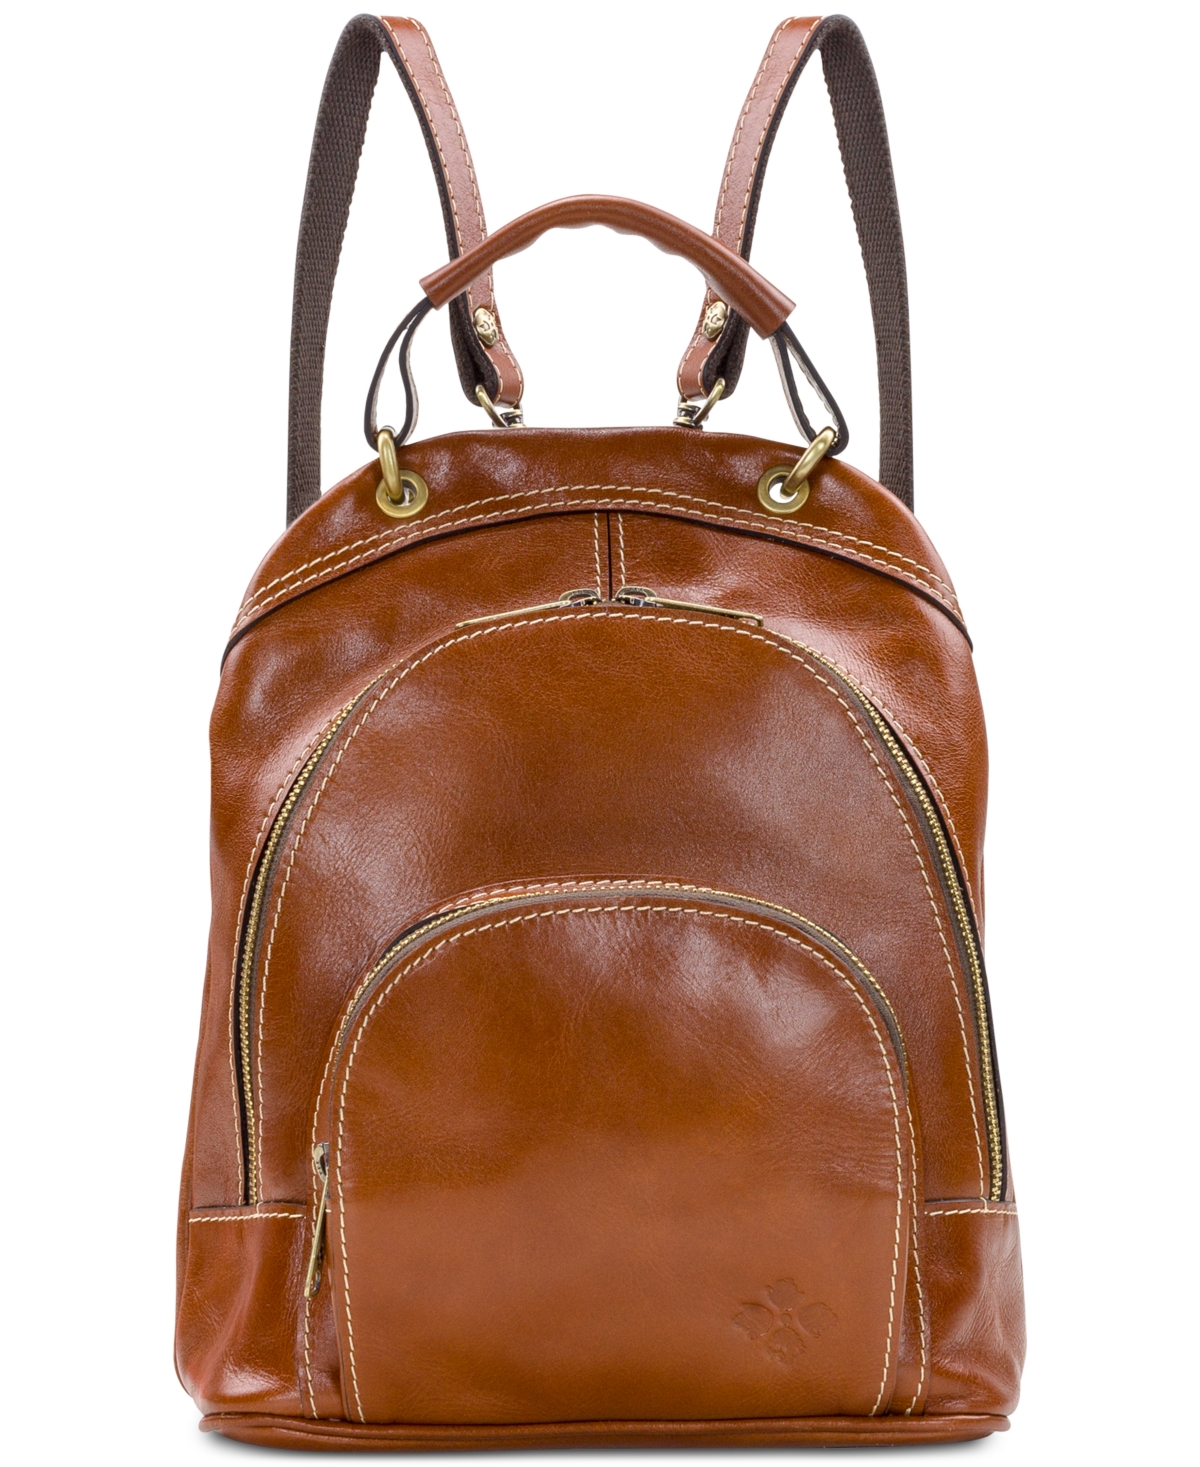 Heritage Leather Alencon Backpack - Tan/Gold